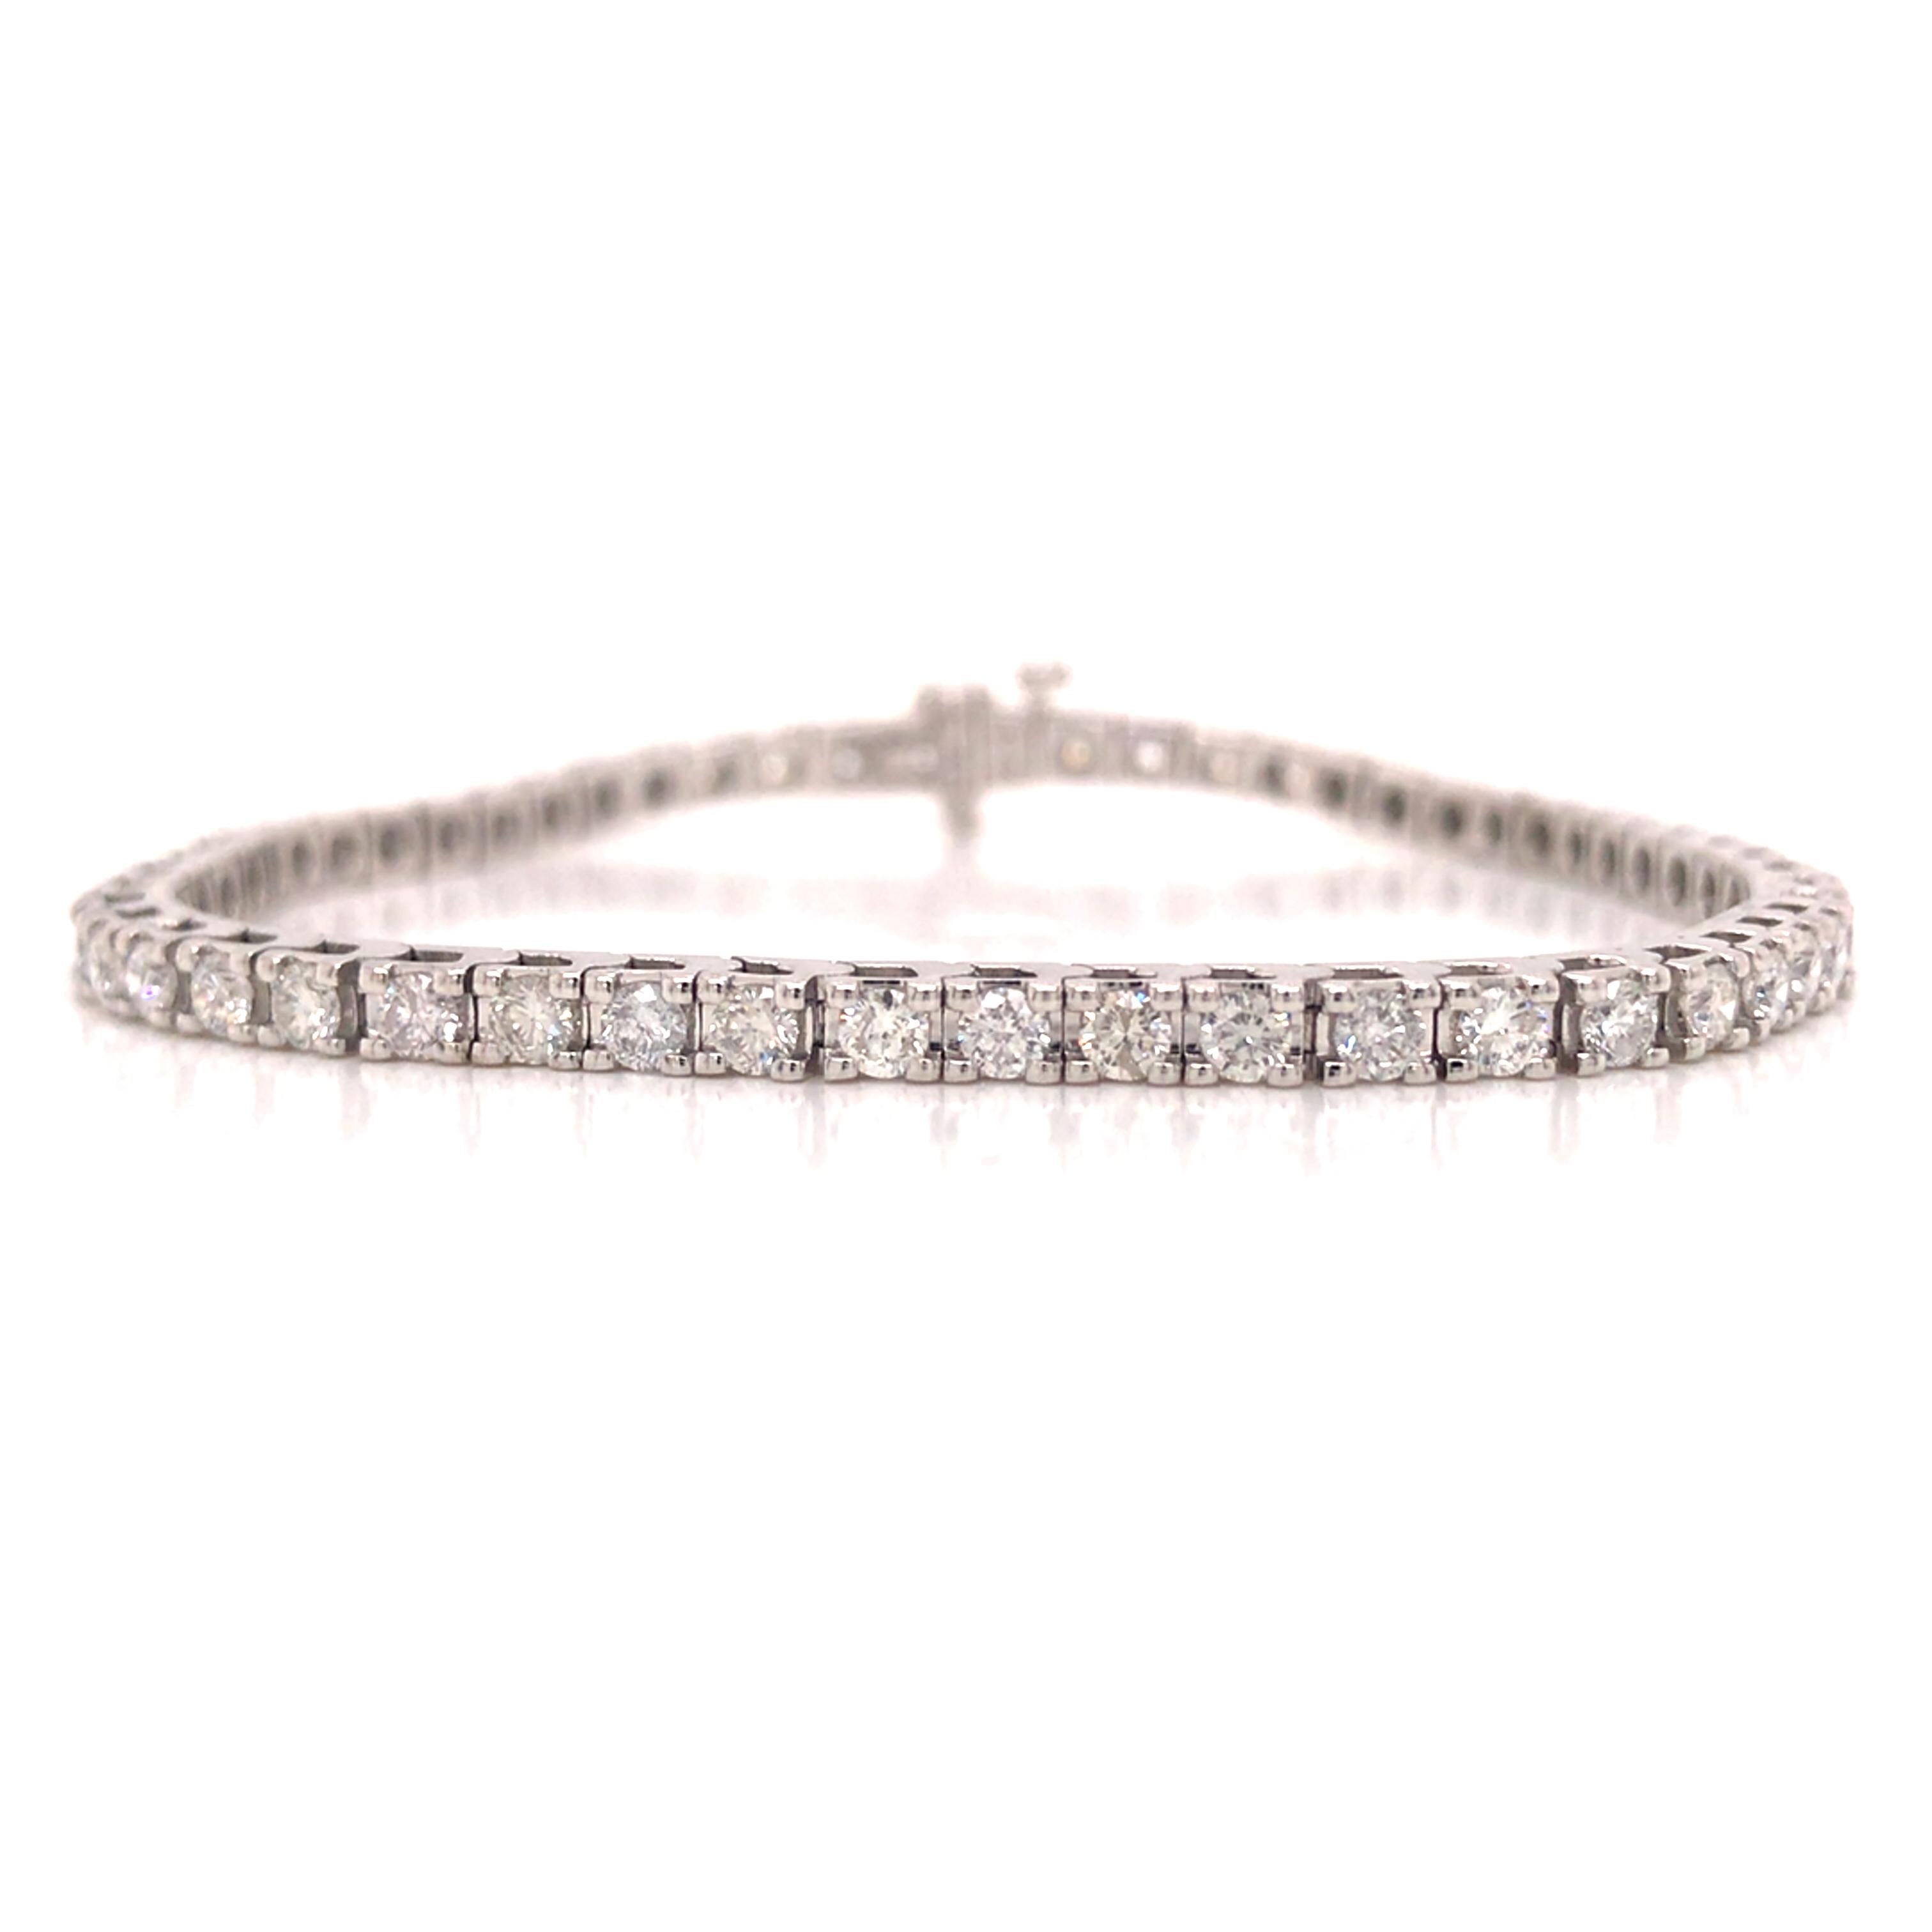 Diamond 3.42 Carat Tennis Bracelet in 14K White Gold.  Round Brilliant Cut Diamonds weighing 3.42 carat total weight, G-H in color and VS-SI in clarity are expertly set.  The Bracelet measures 7 inch in length and approximately 1/8 inch in width. 